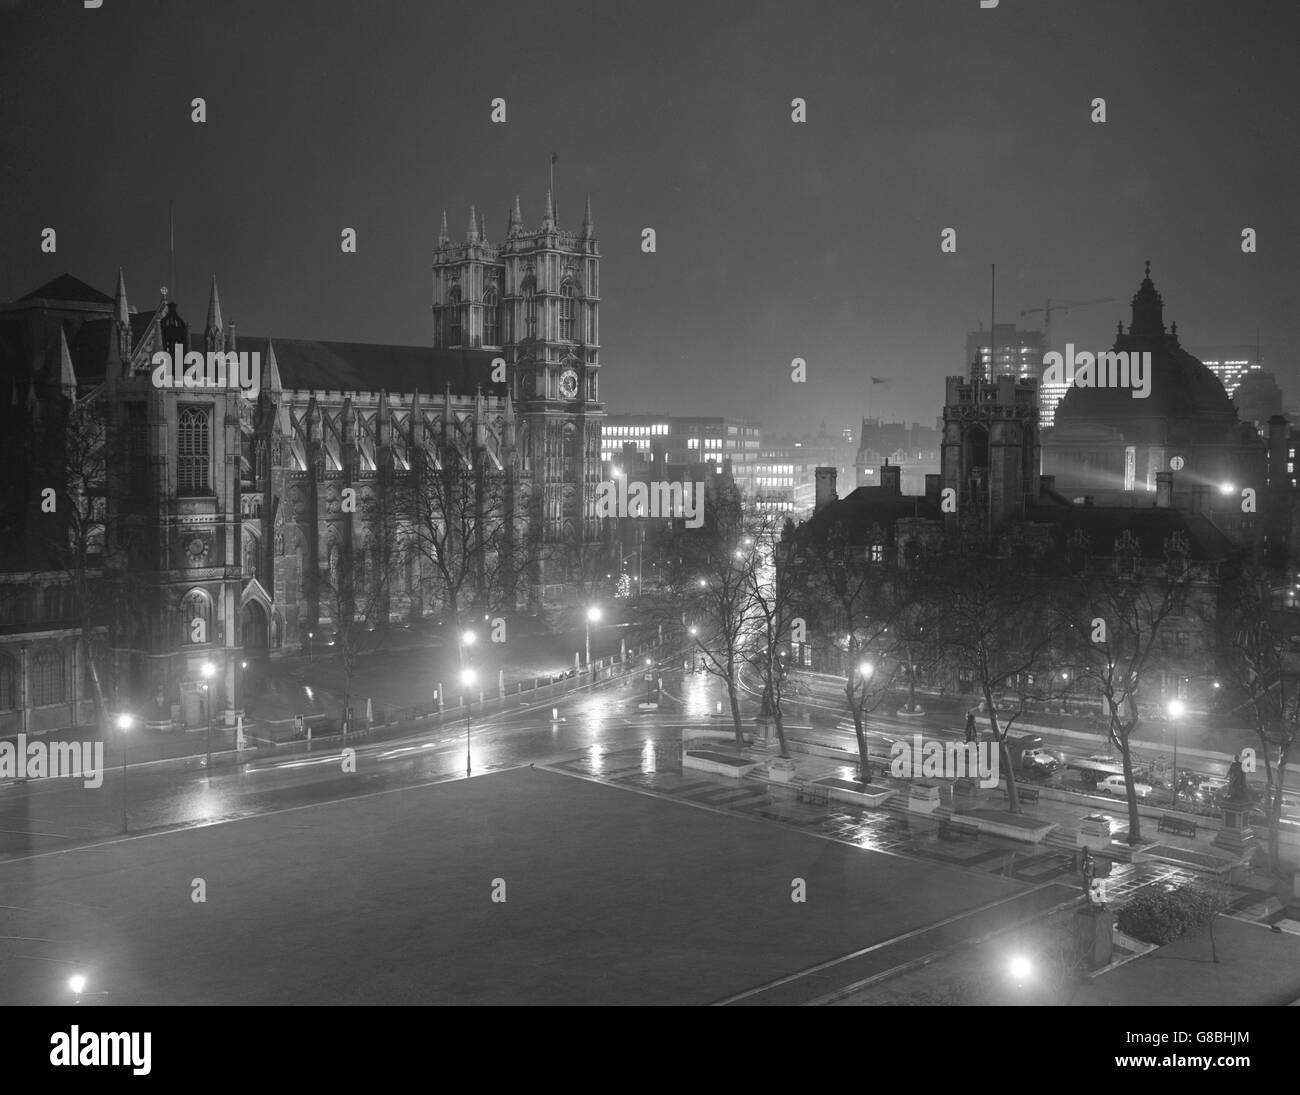 London's Parliament Square, dominated by the floodlit Westminster Abbey. The abbey, illuminated for its 900th anniversary year, is to be permanently floodlighted. Stock Photo